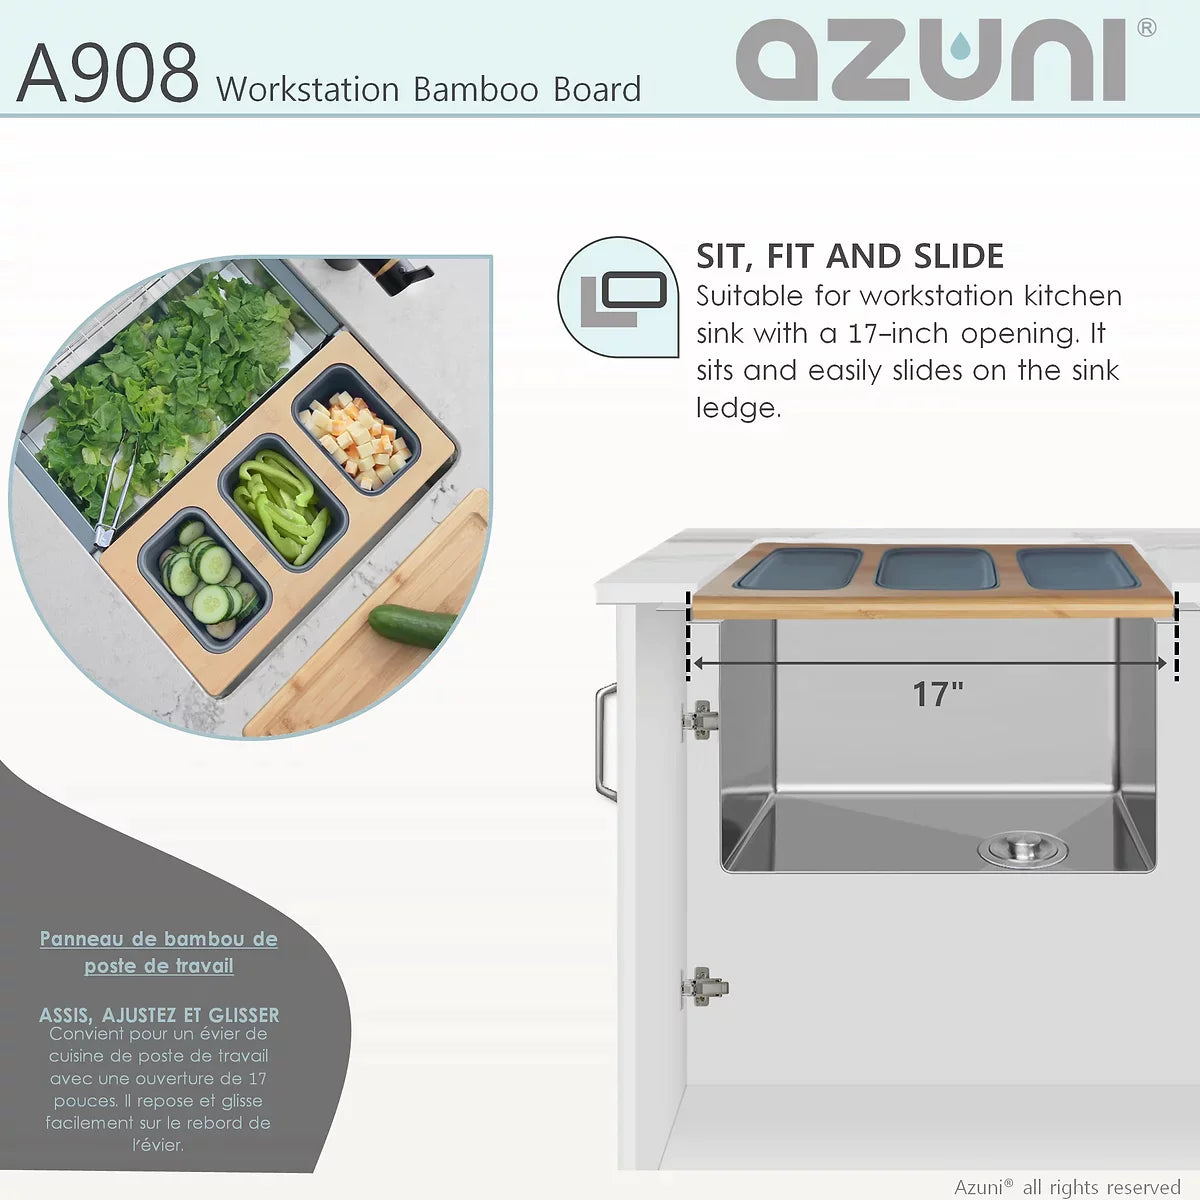 Stylish Azuni 17" Workstation Sink Bamboo Serving Board Set With 3 Containers A908